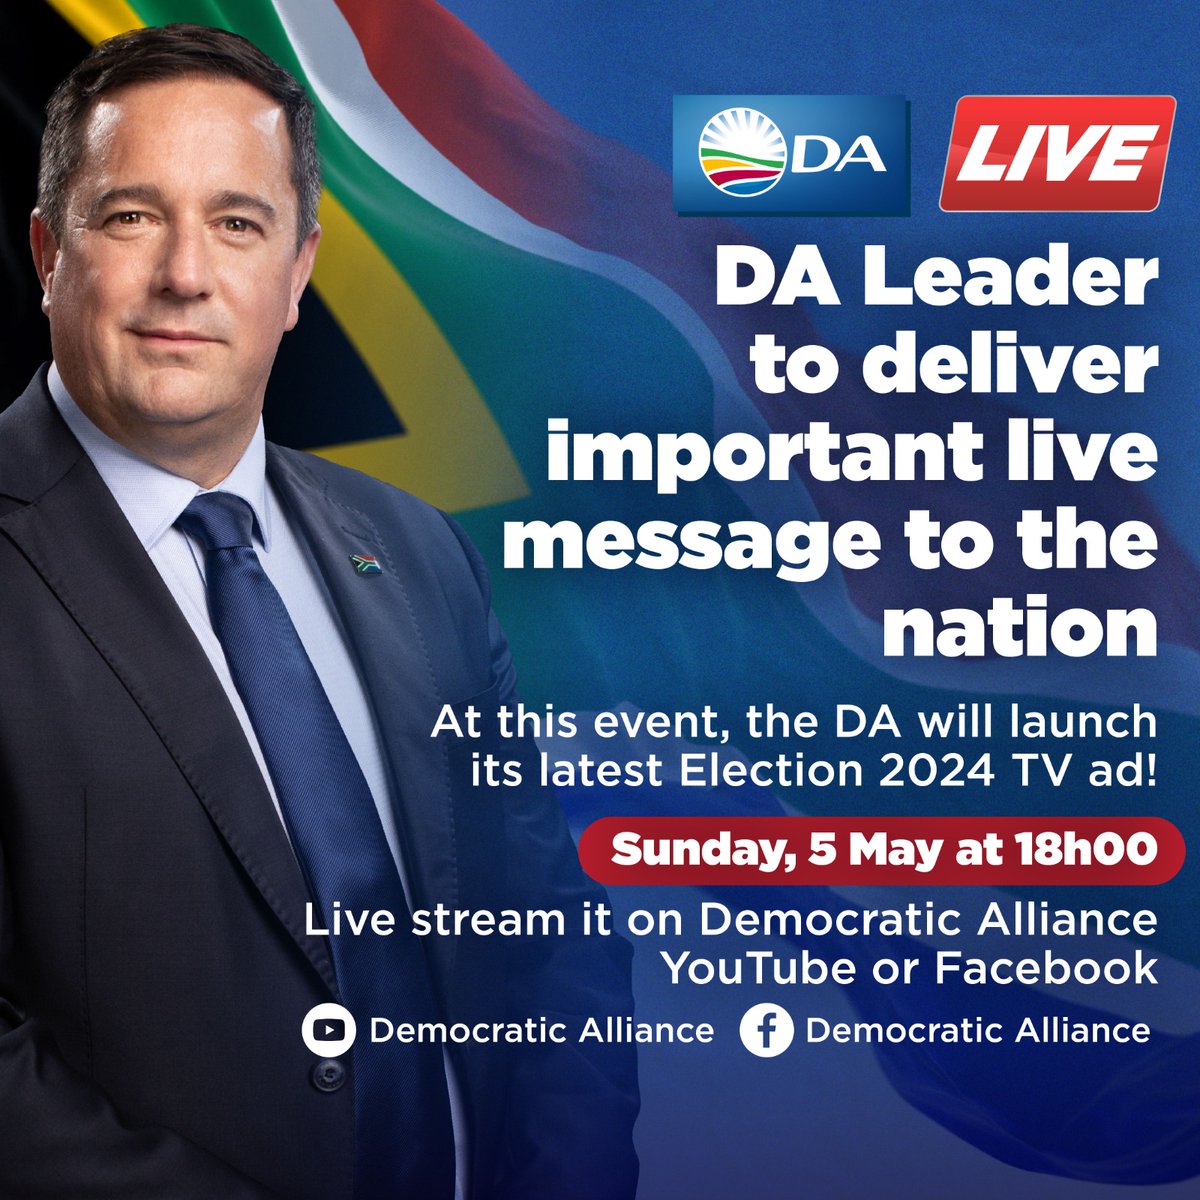 🔔 Set your reminder. Tomorrow, Sunday 05 May at 18h00, DA Leader John Steenhuisen will deliver an important message to the nation. Watch this live on the DA's Facebook and YouTube pages: youtube.com/live/pSXGanoaF… Be part of the historic mission to #RescueSA. 🇿🇦